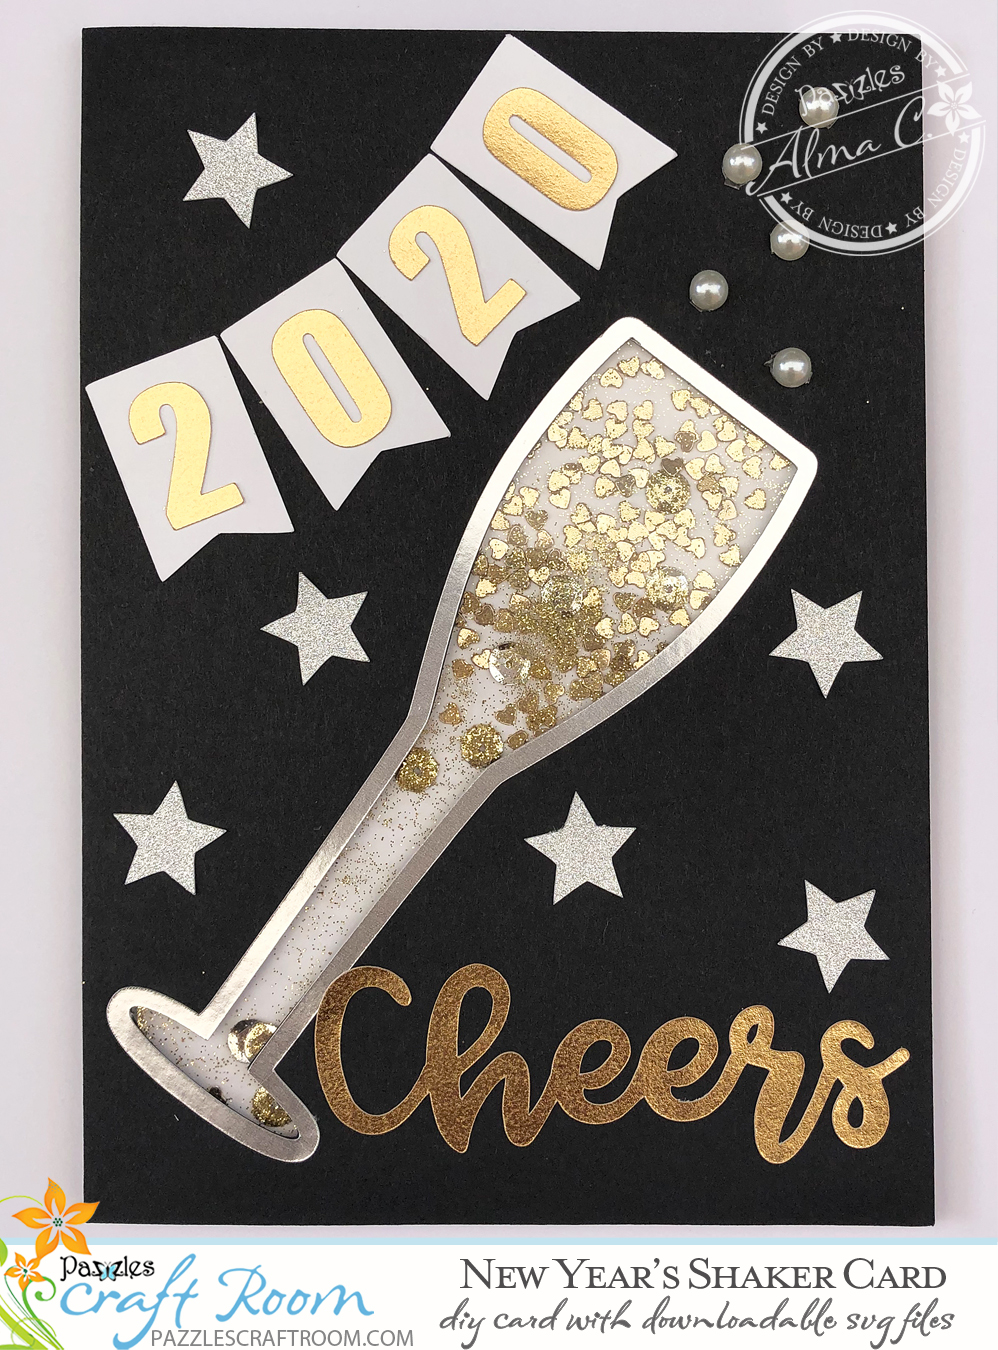 Pazzles DIY New Year's Shaker Card with instant SVG download. Compatible with all major electronic cutters including Pazzles Inspiration, Cricut, and Silhouette Cameo. Design by Alma Cervantes.